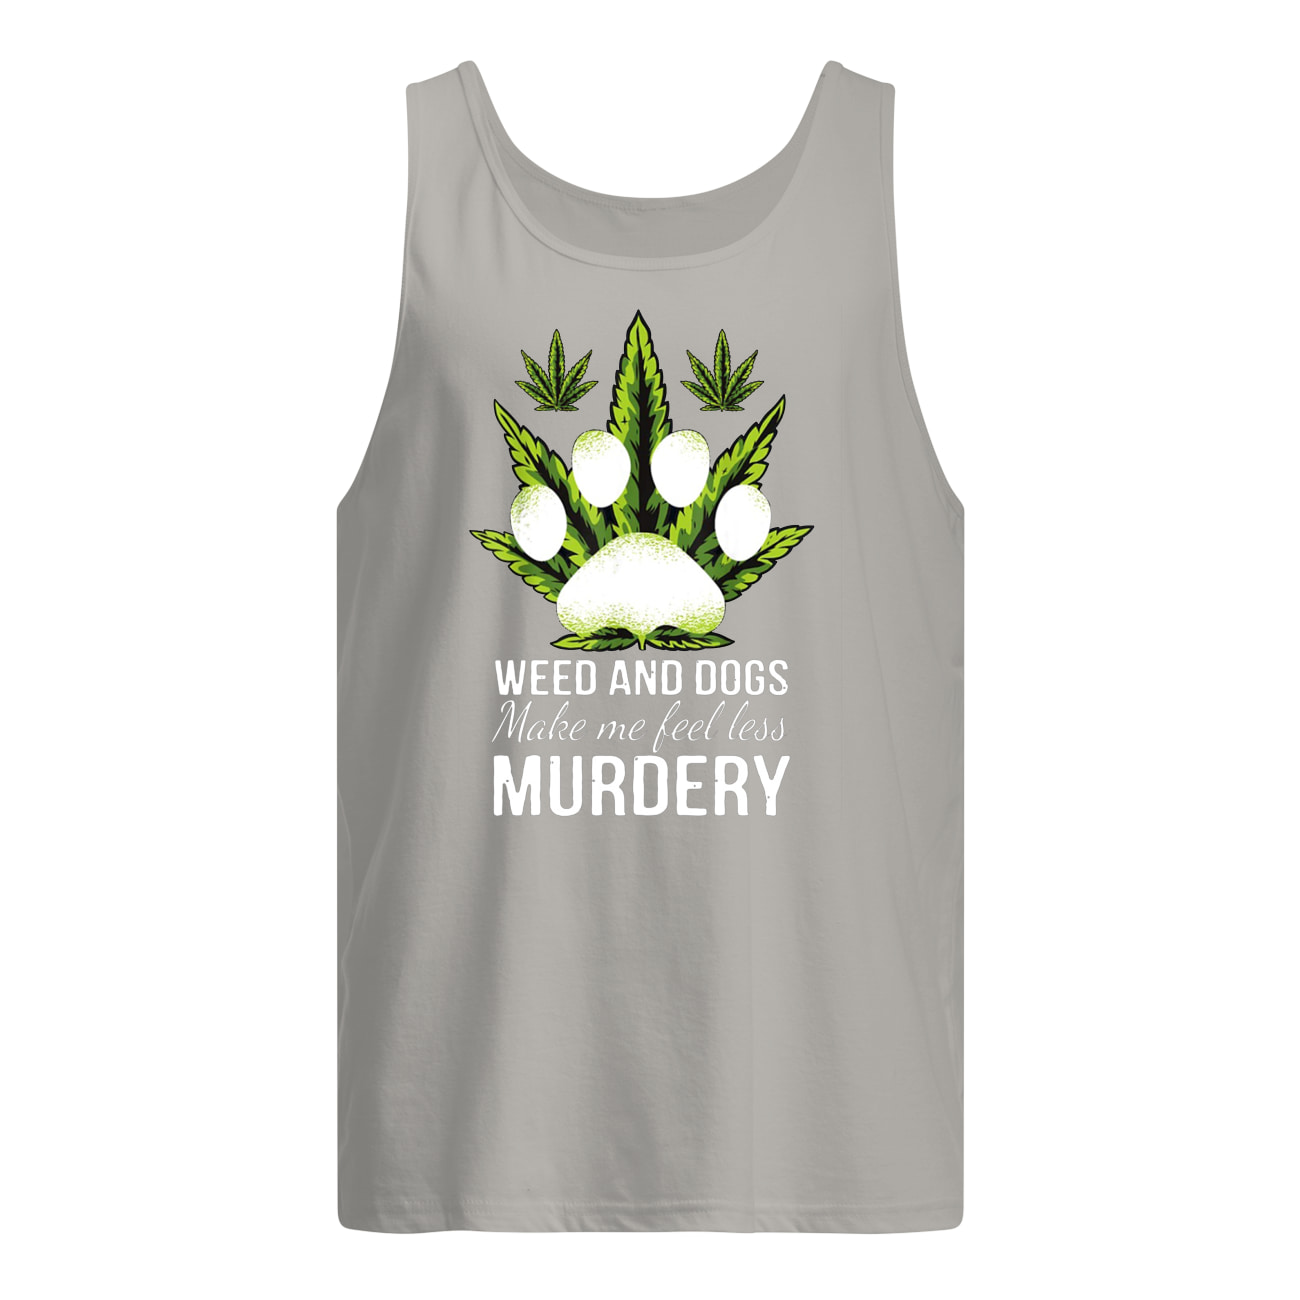 Weed and dogs make me feel less murdery tank top